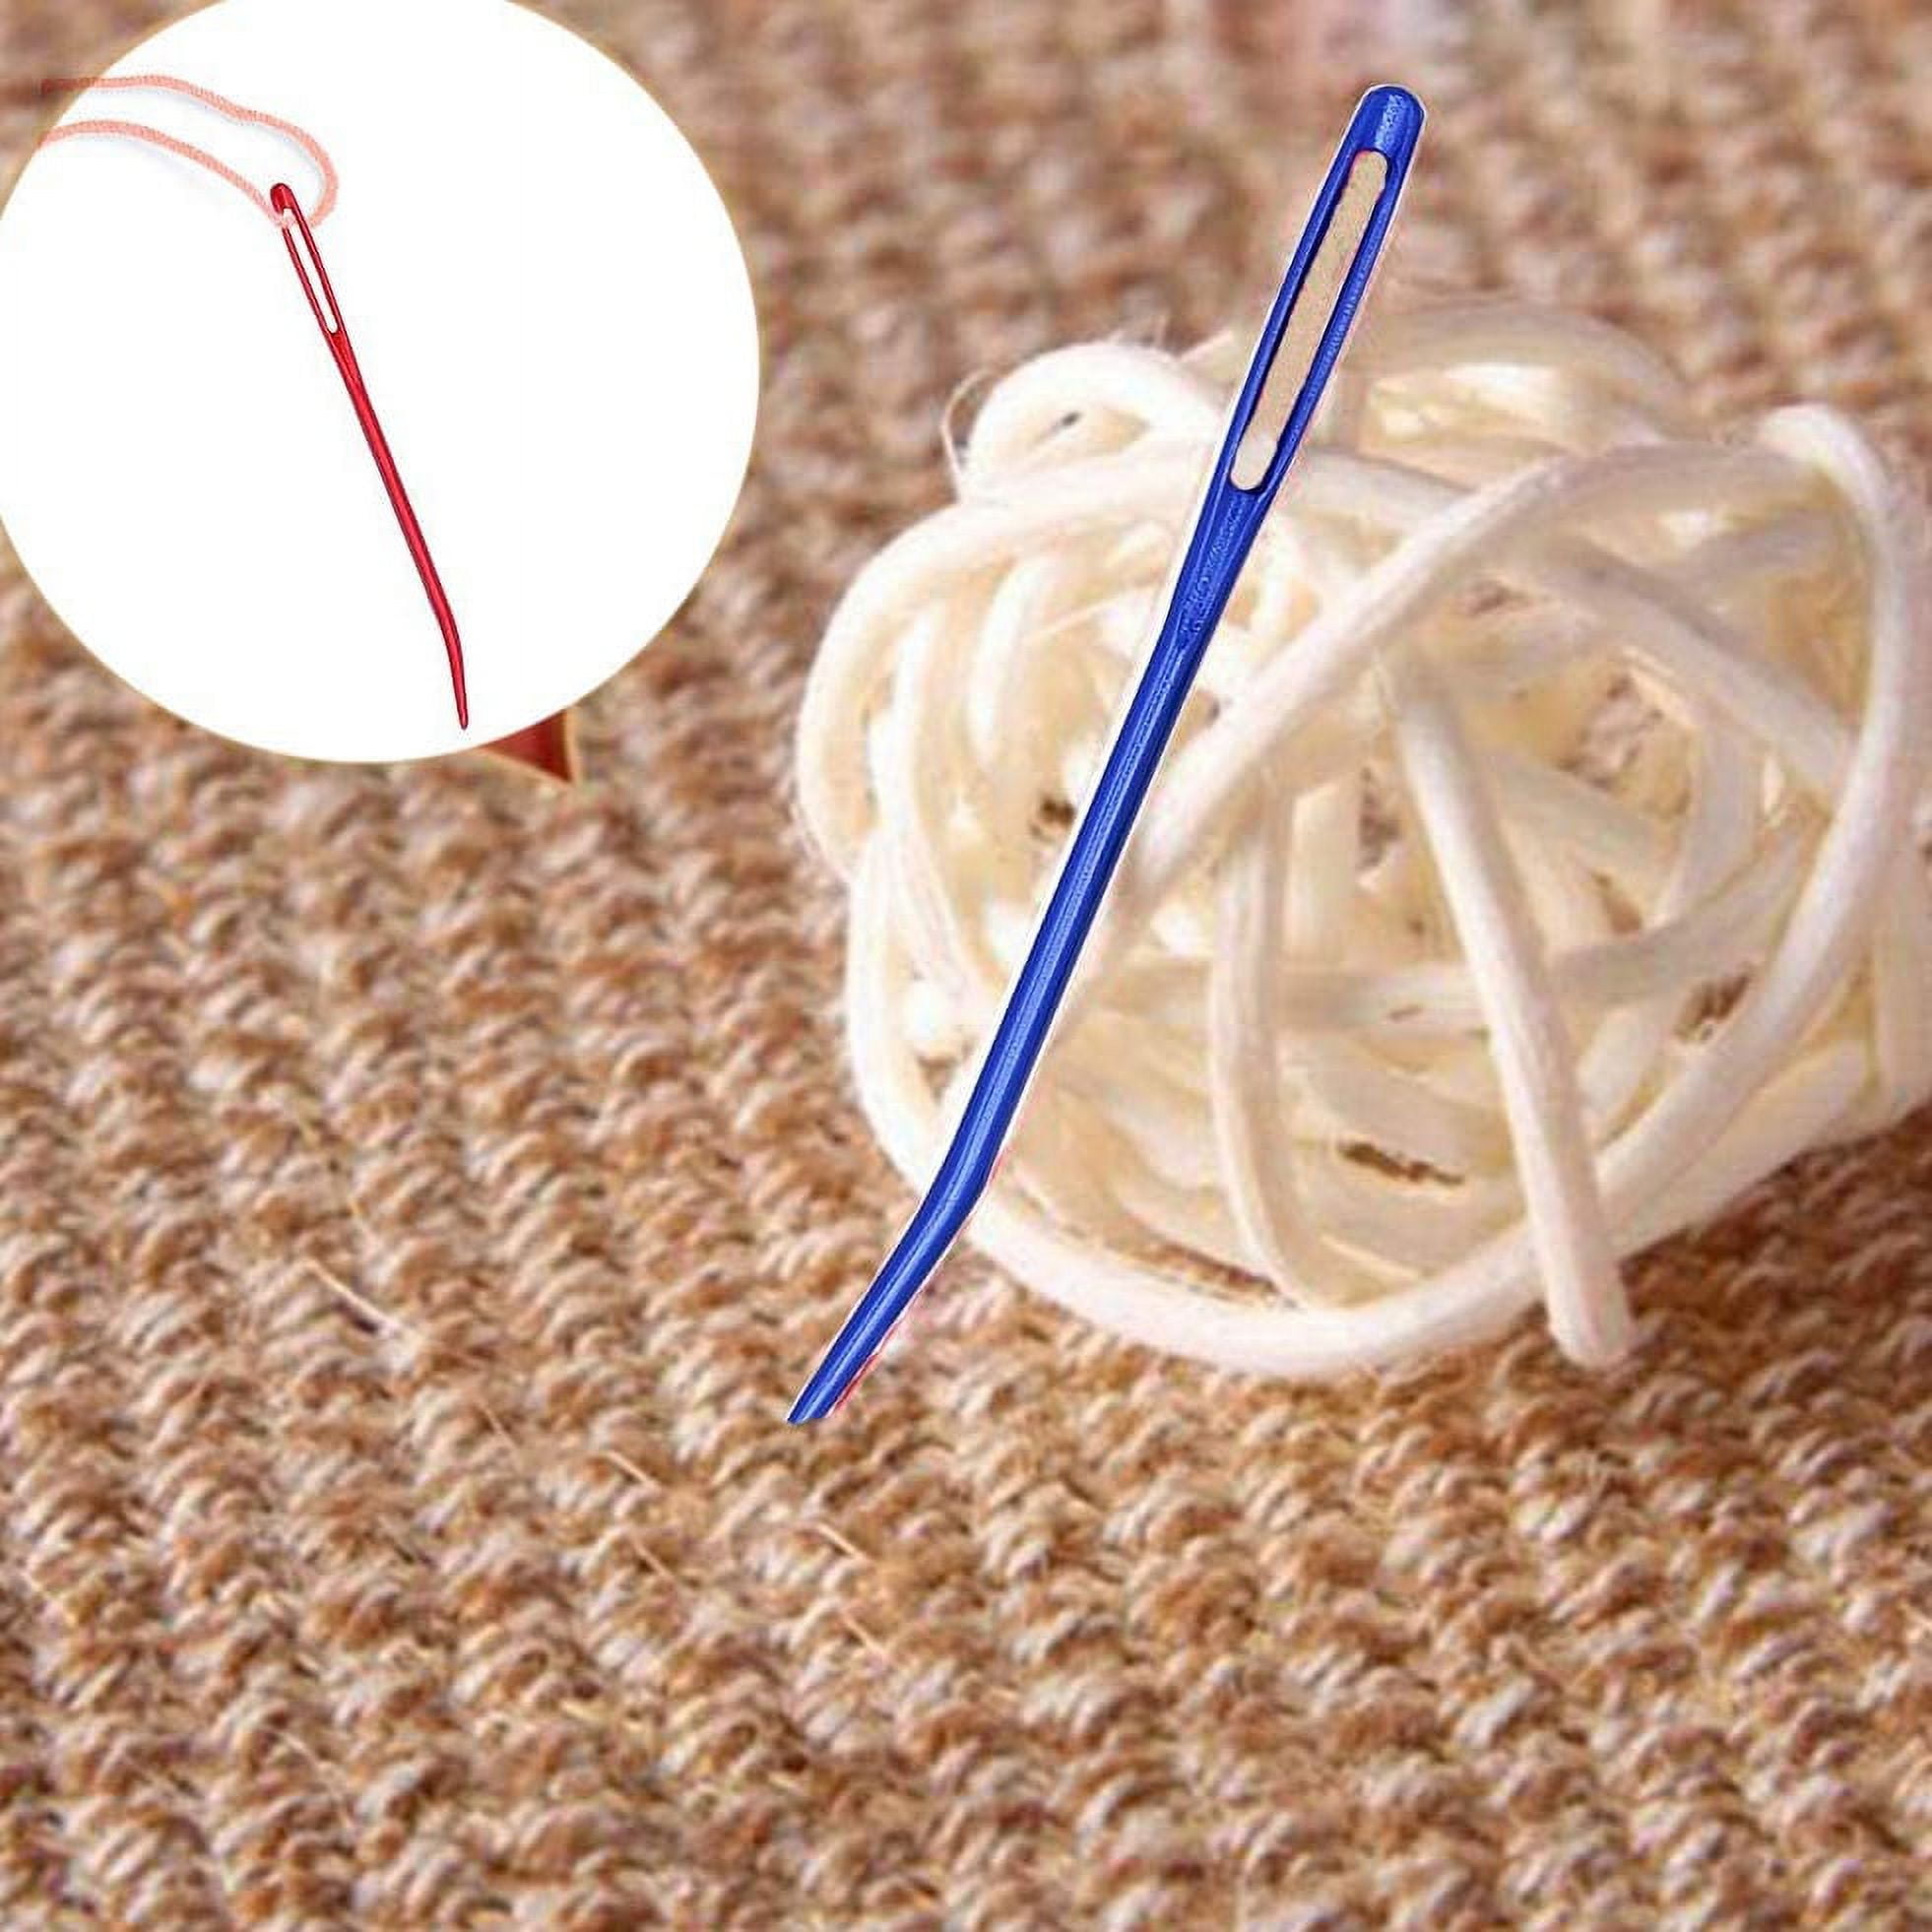 Plastic Yarn Sewing Needles, Weaving Needles, Darning Needles, Wreath  Makers Accessories, Crochet or Knitting Accessories, Select a Size 